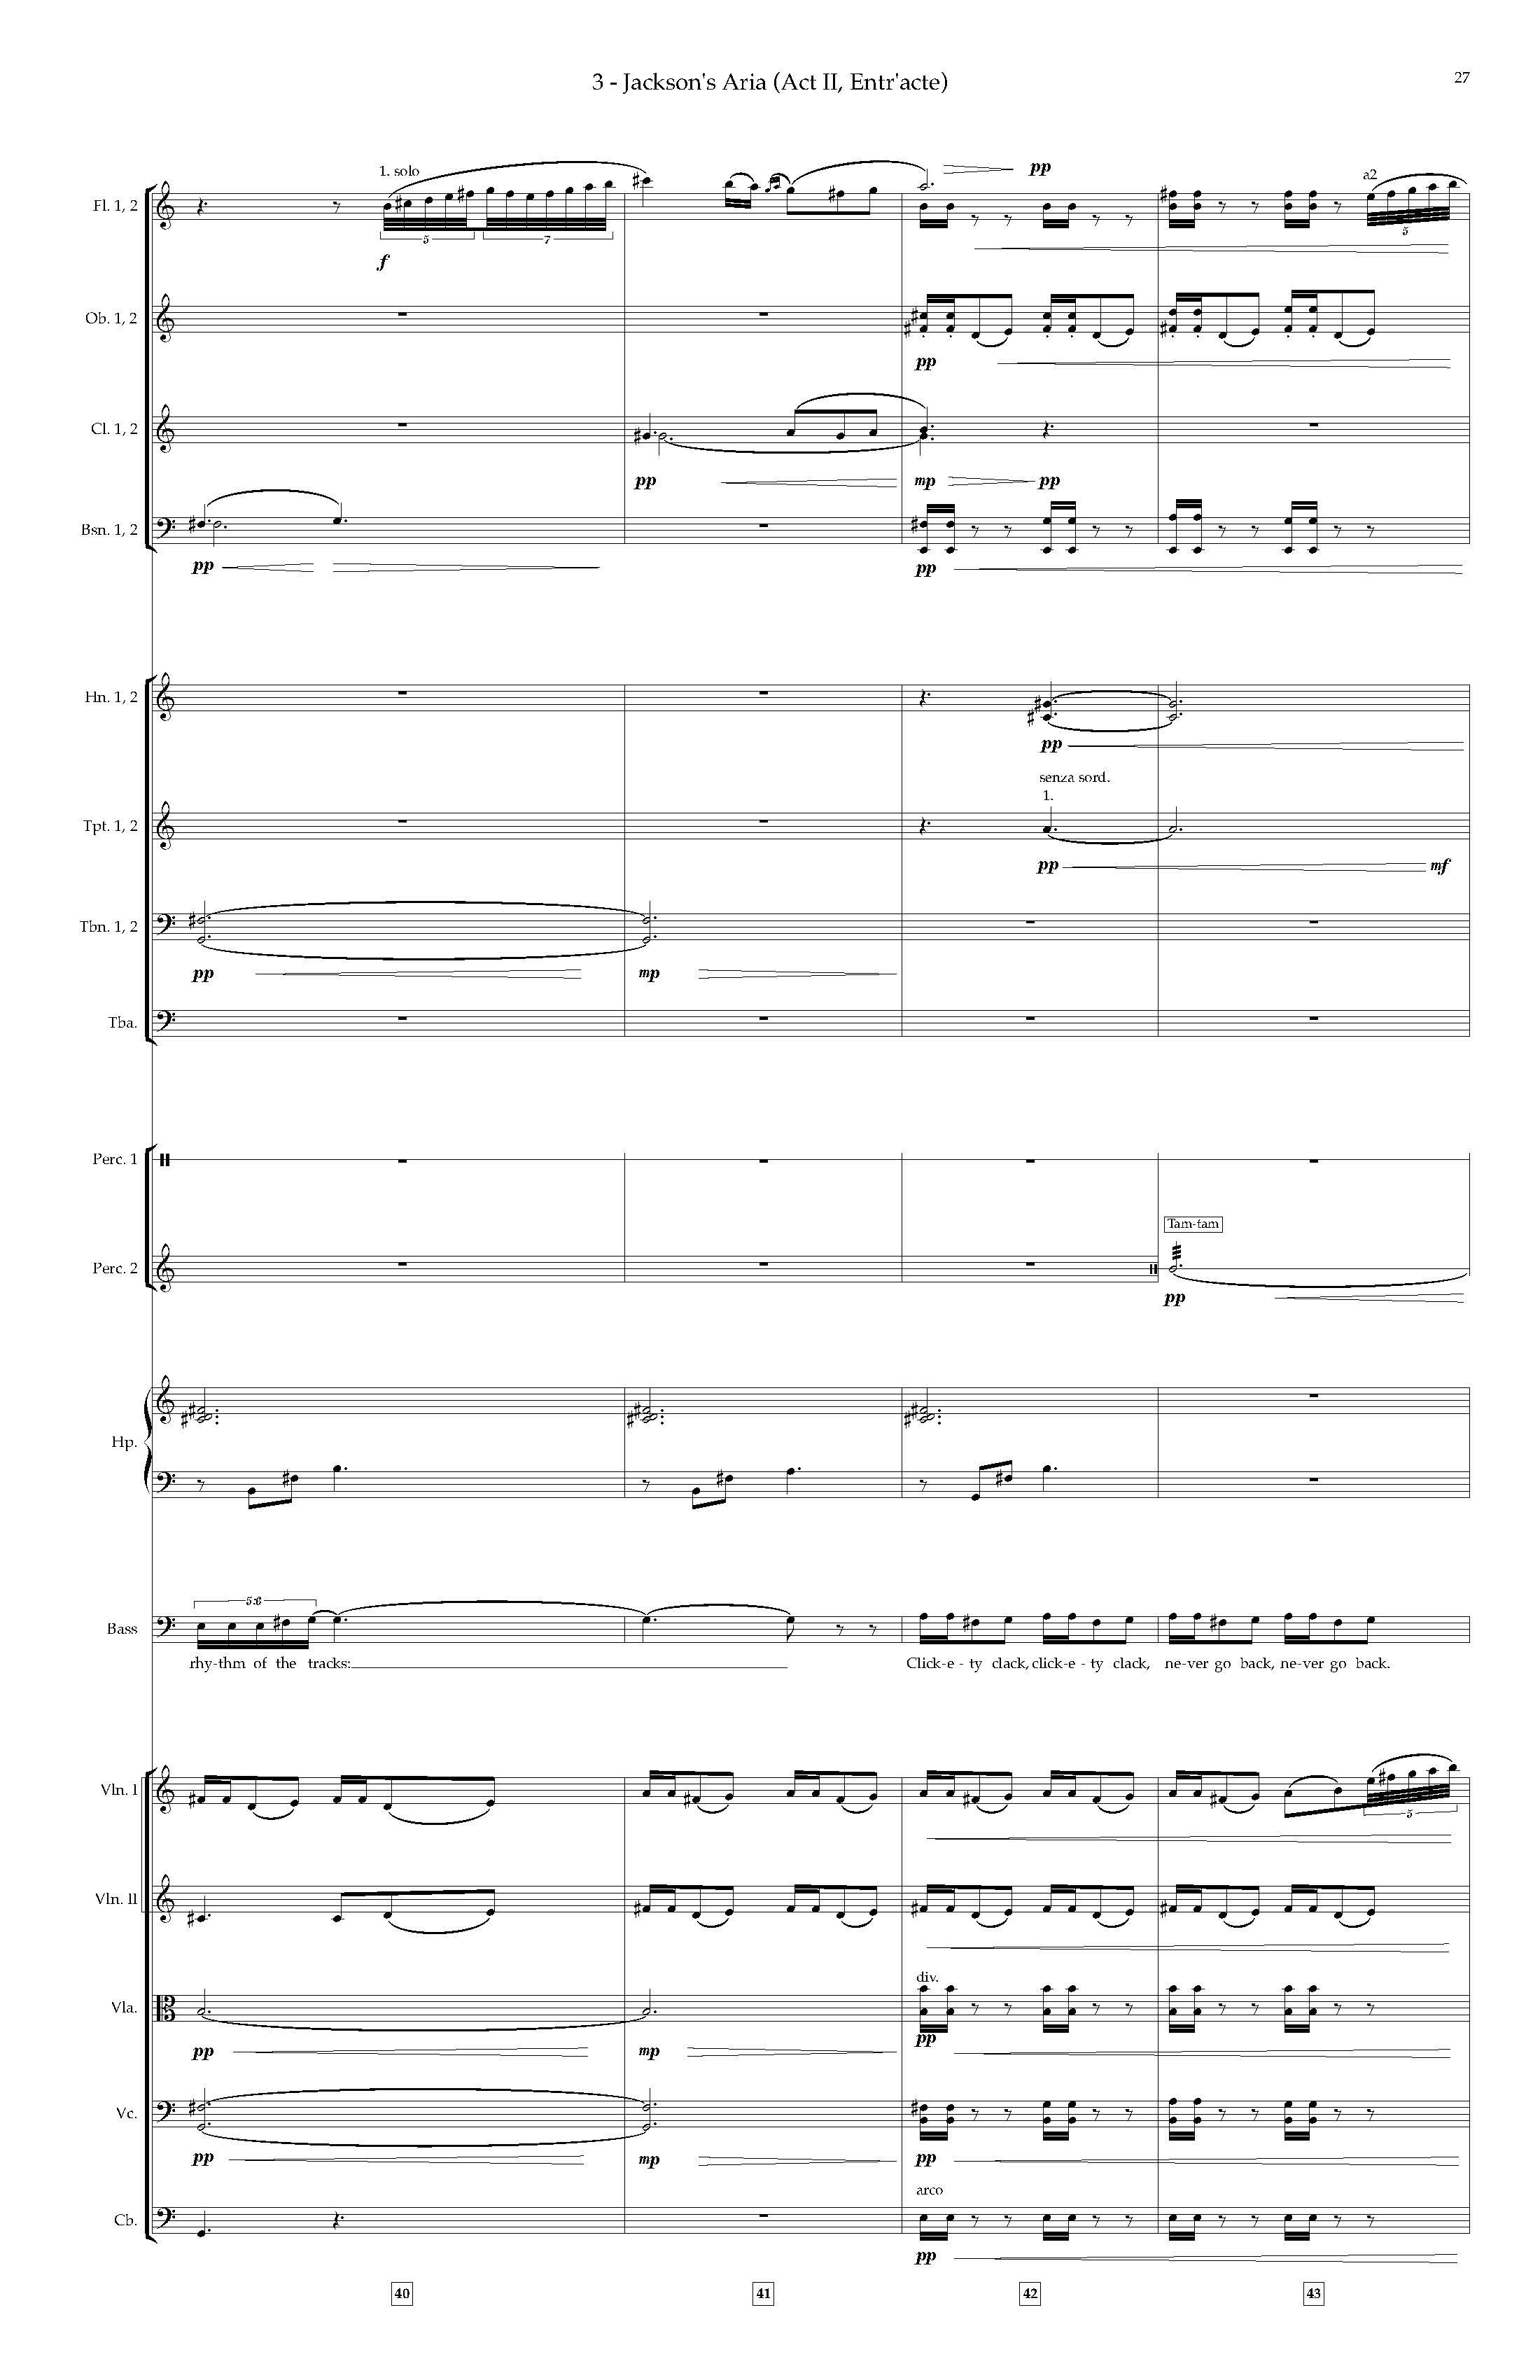 Arias and Interludes from HWGS - Complete Score_Page_33.jpg